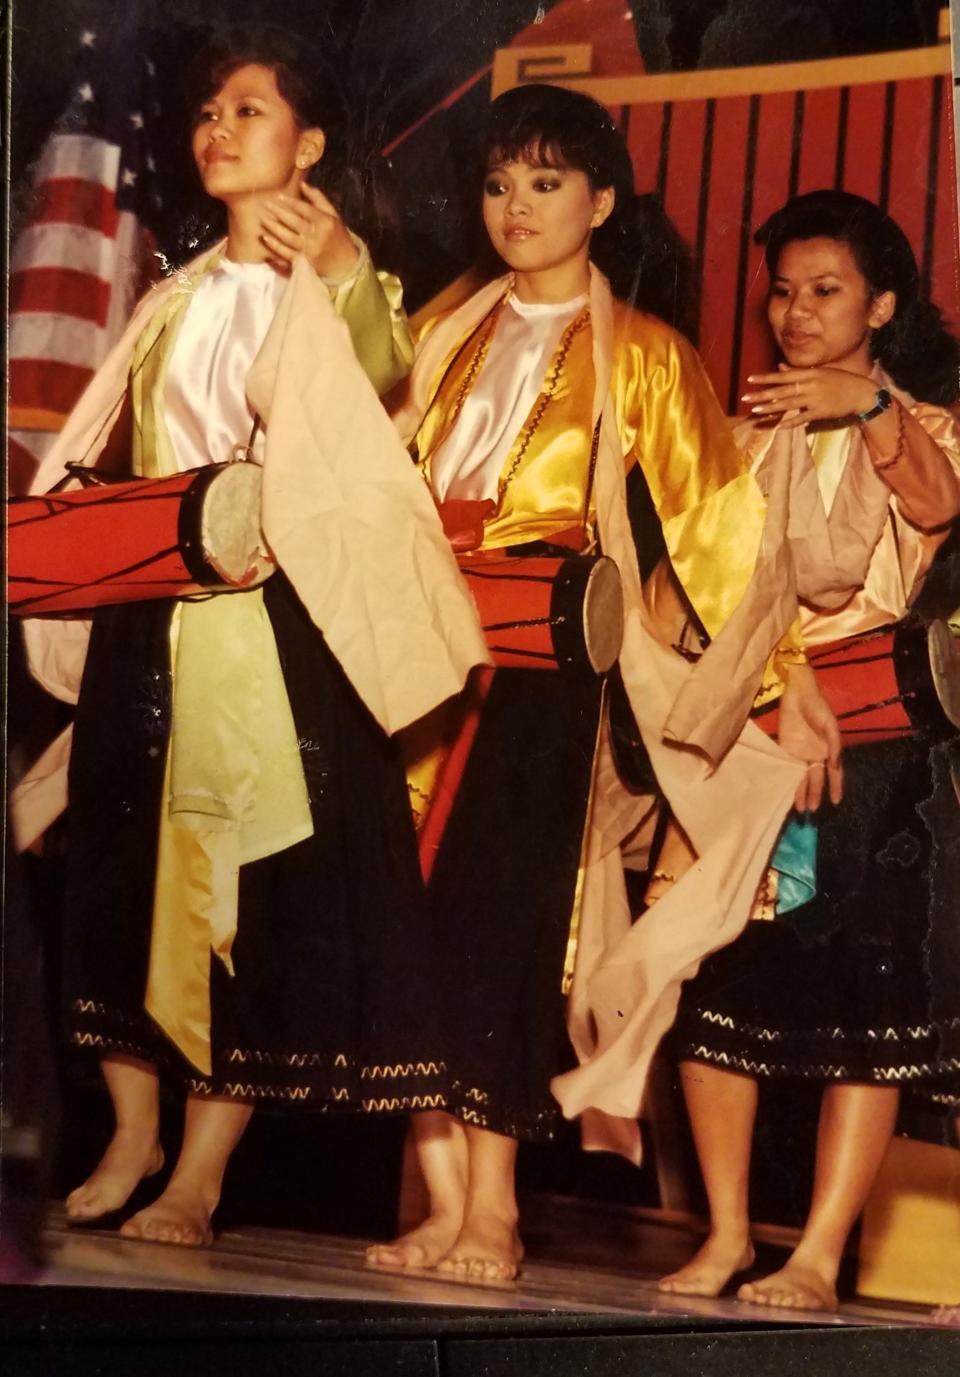 From left, Thuan Le Elston, her best friend, Tran Tran, and her sister, Tien Le Nguyen, dance to a traditional Vietnamese drum song at a Tet celebration in Phoenix, Ariz., in the late 1980s.